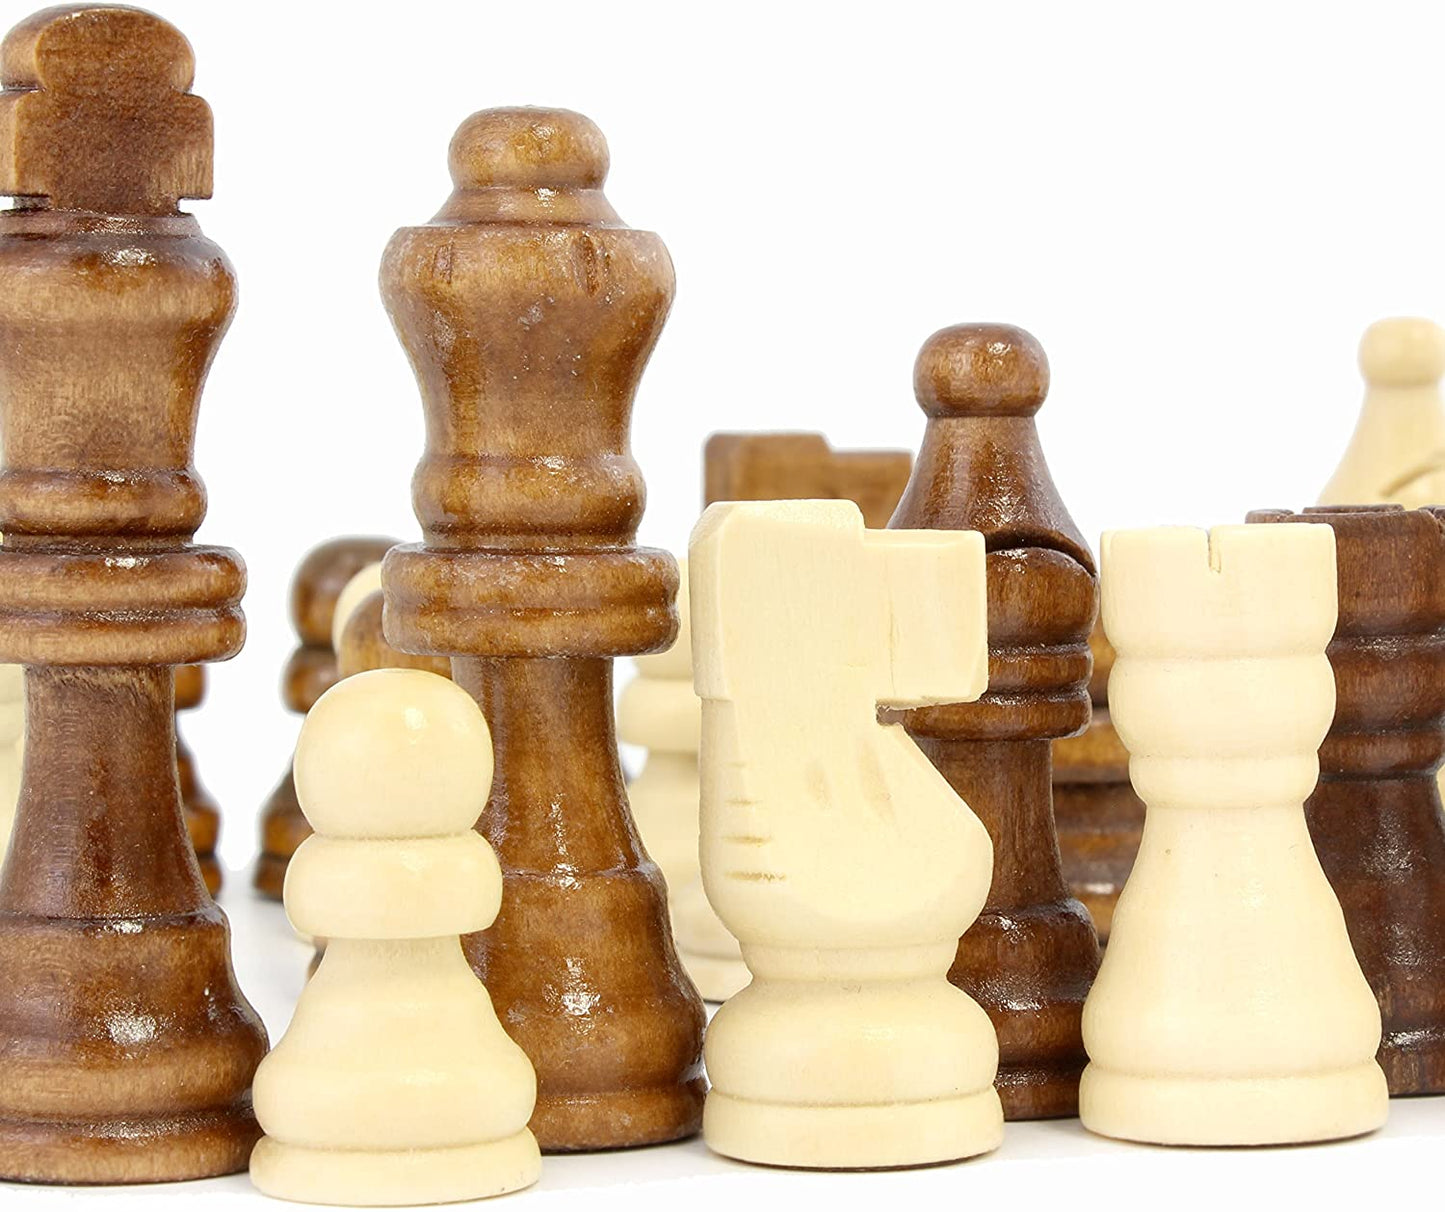 Complete Wooden Chess Pieces (32 Pieces)